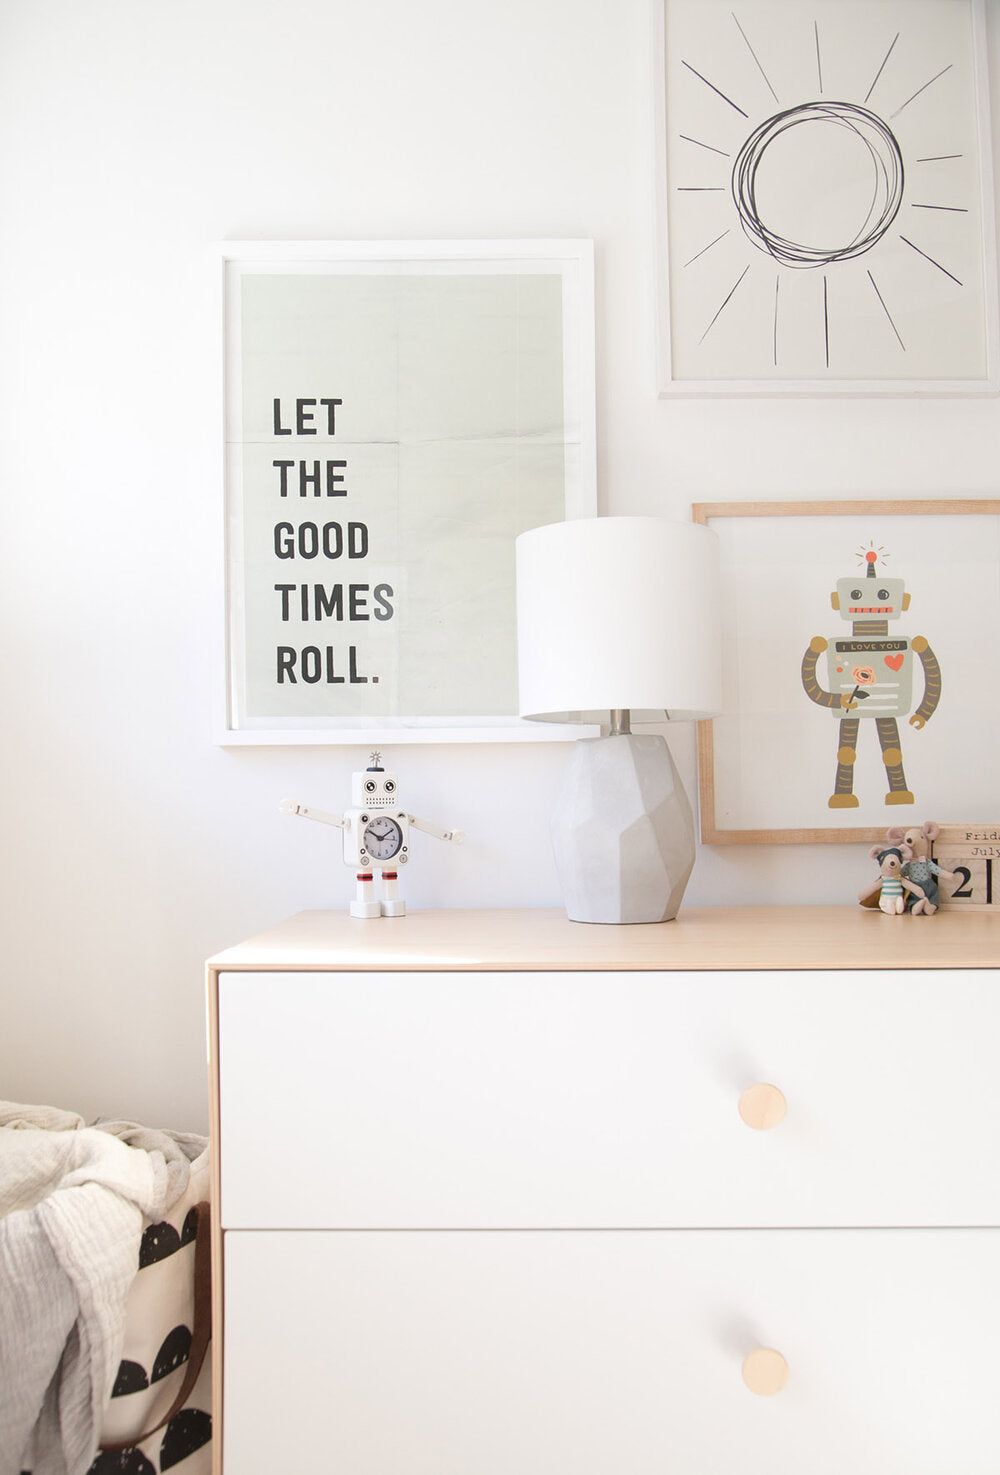 Boys room gallery wall with robots and minimal style art